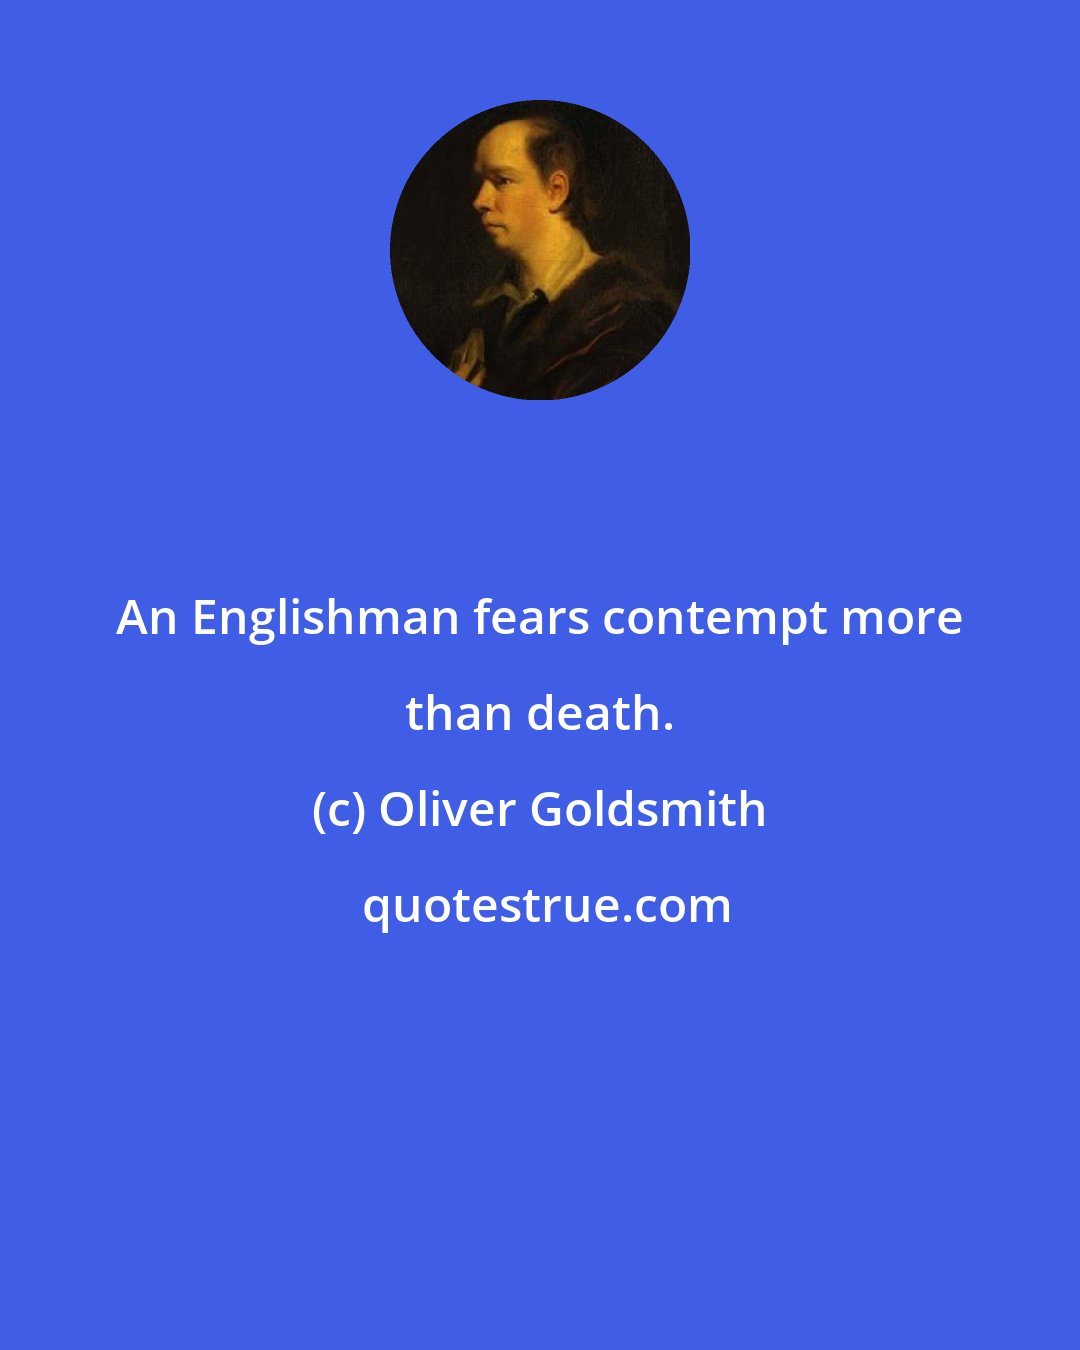 Oliver Goldsmith: An Englishman fears contempt more than death.